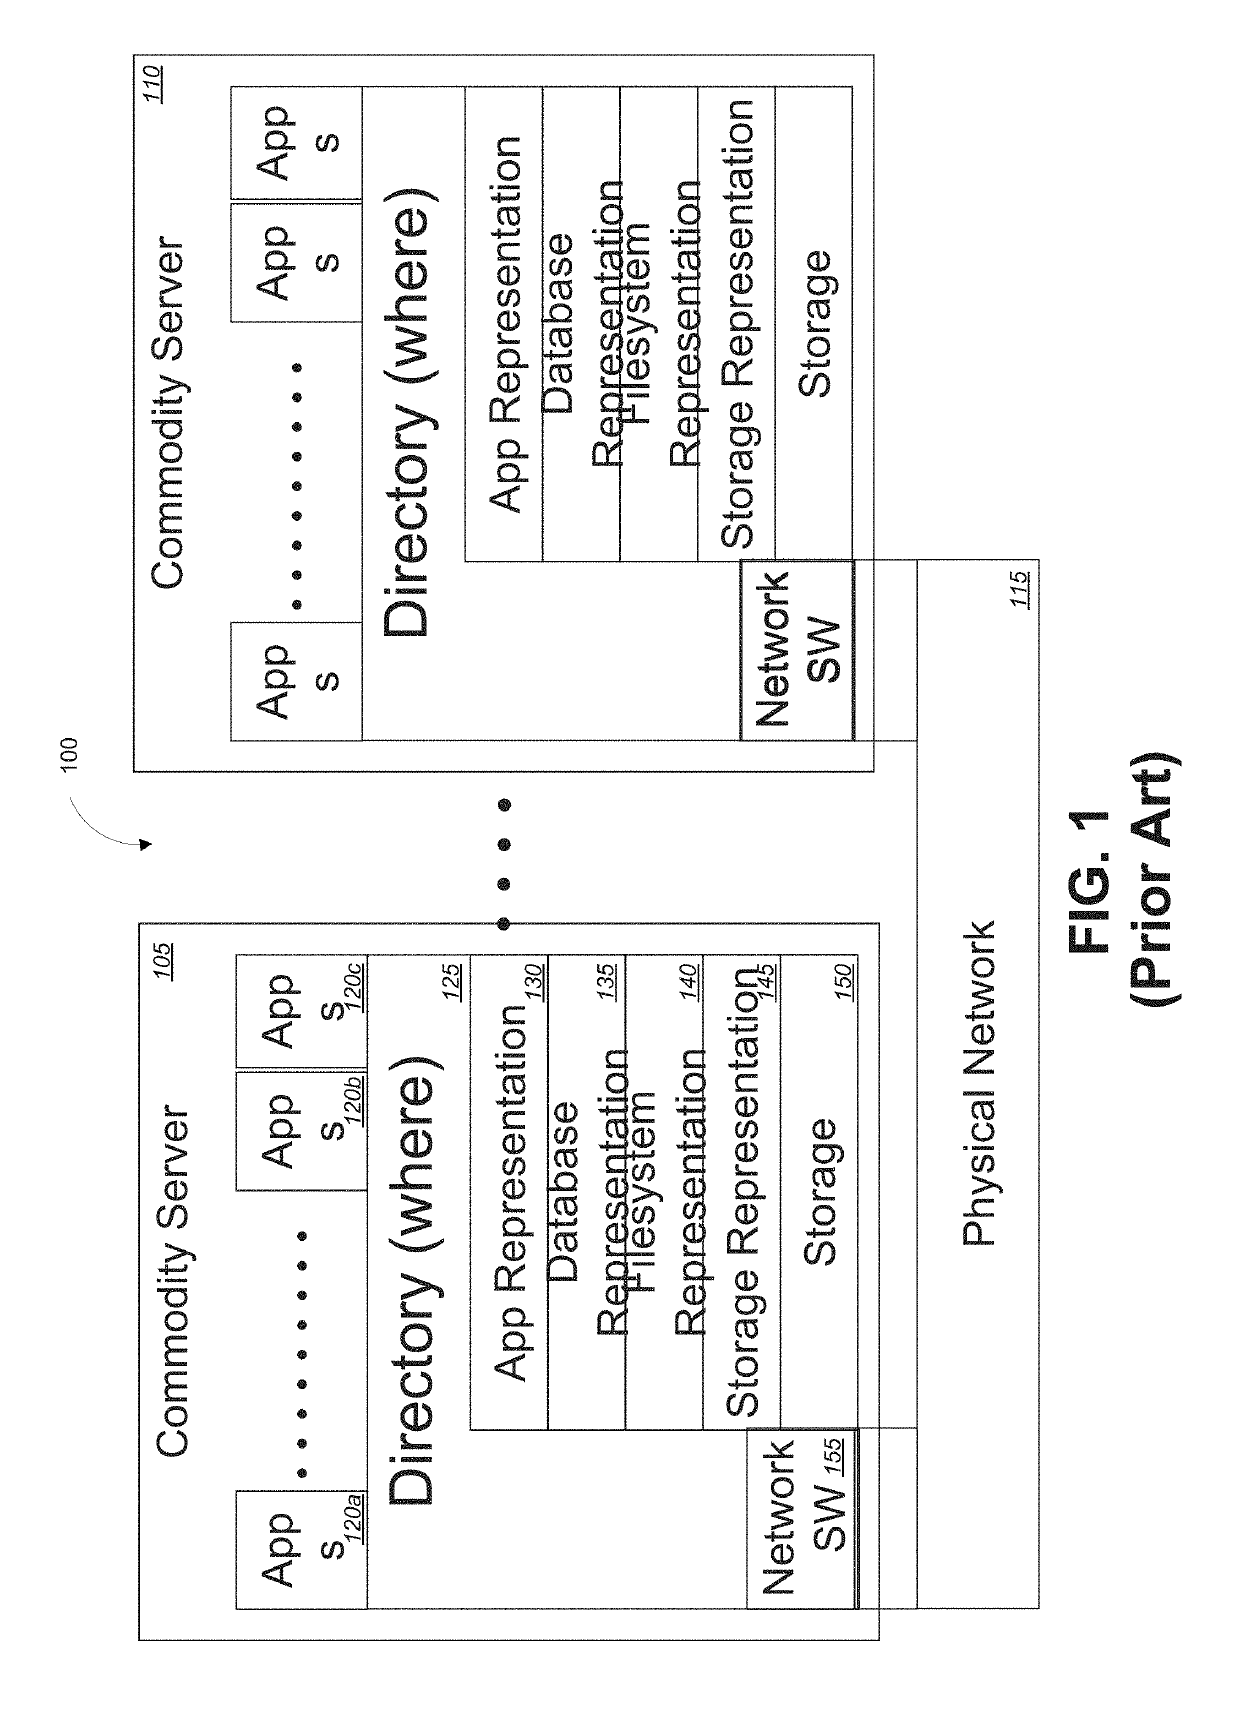 Memory fabric operations and coherency using fault tolerant objects